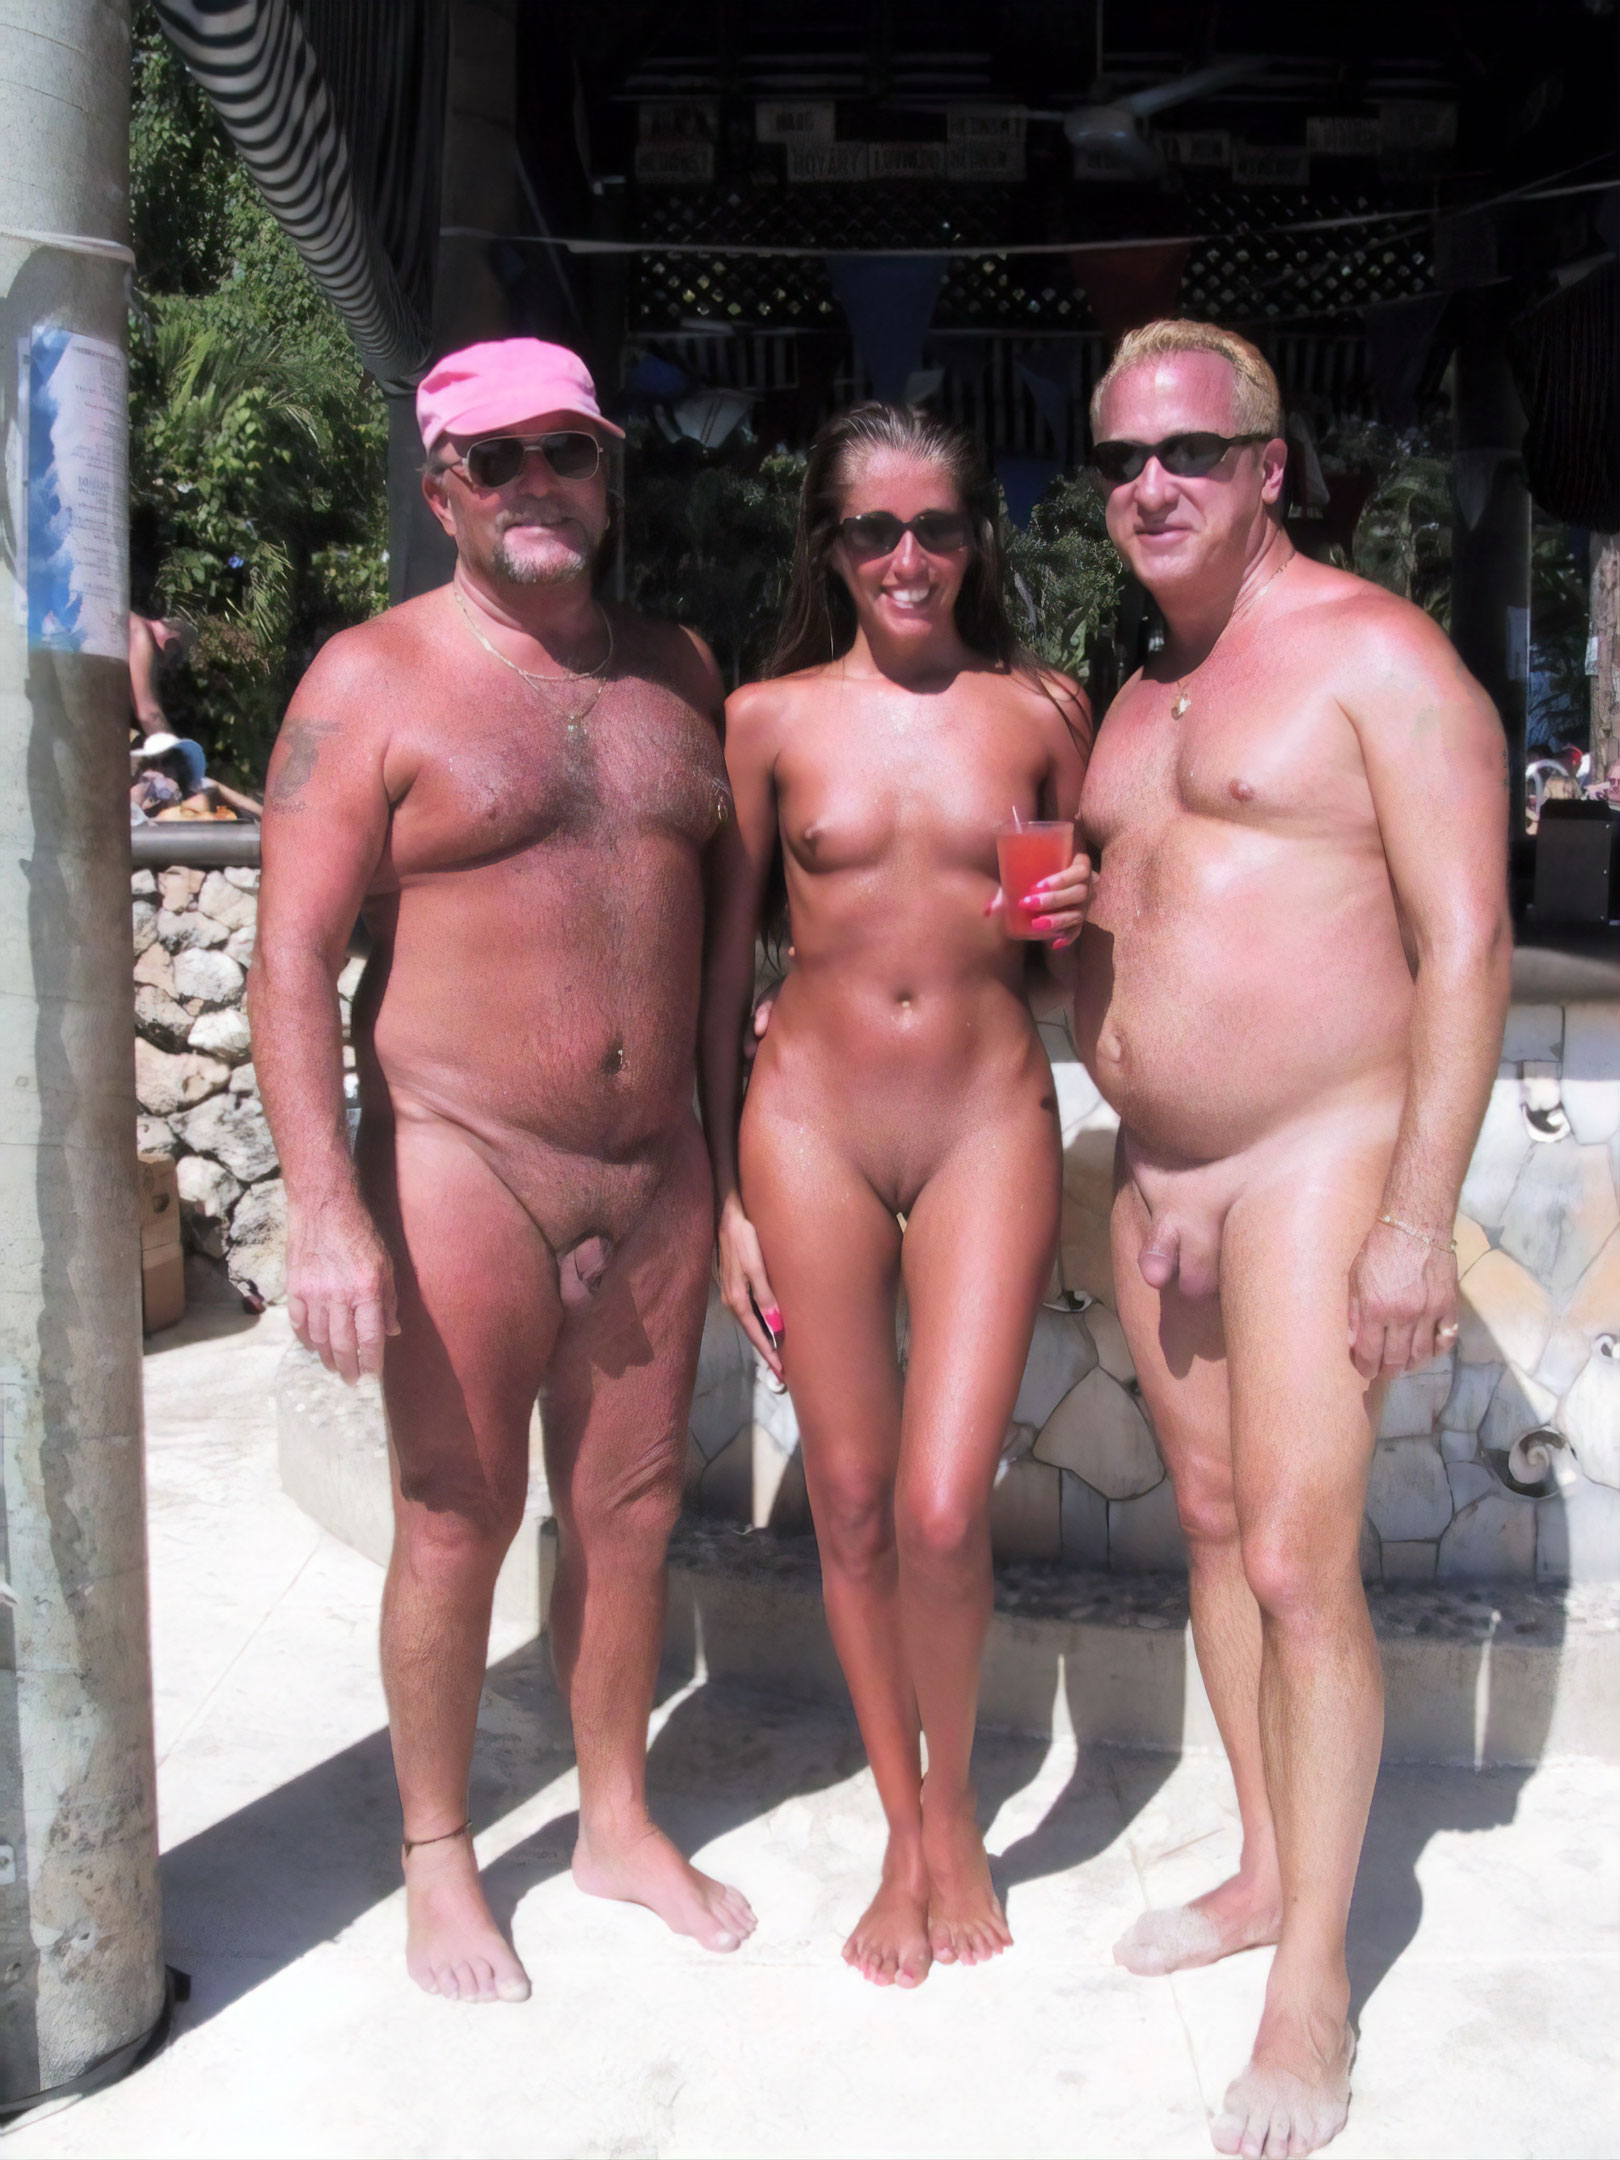 Nudist people of different age passing nude time together - Old Young Nudis...